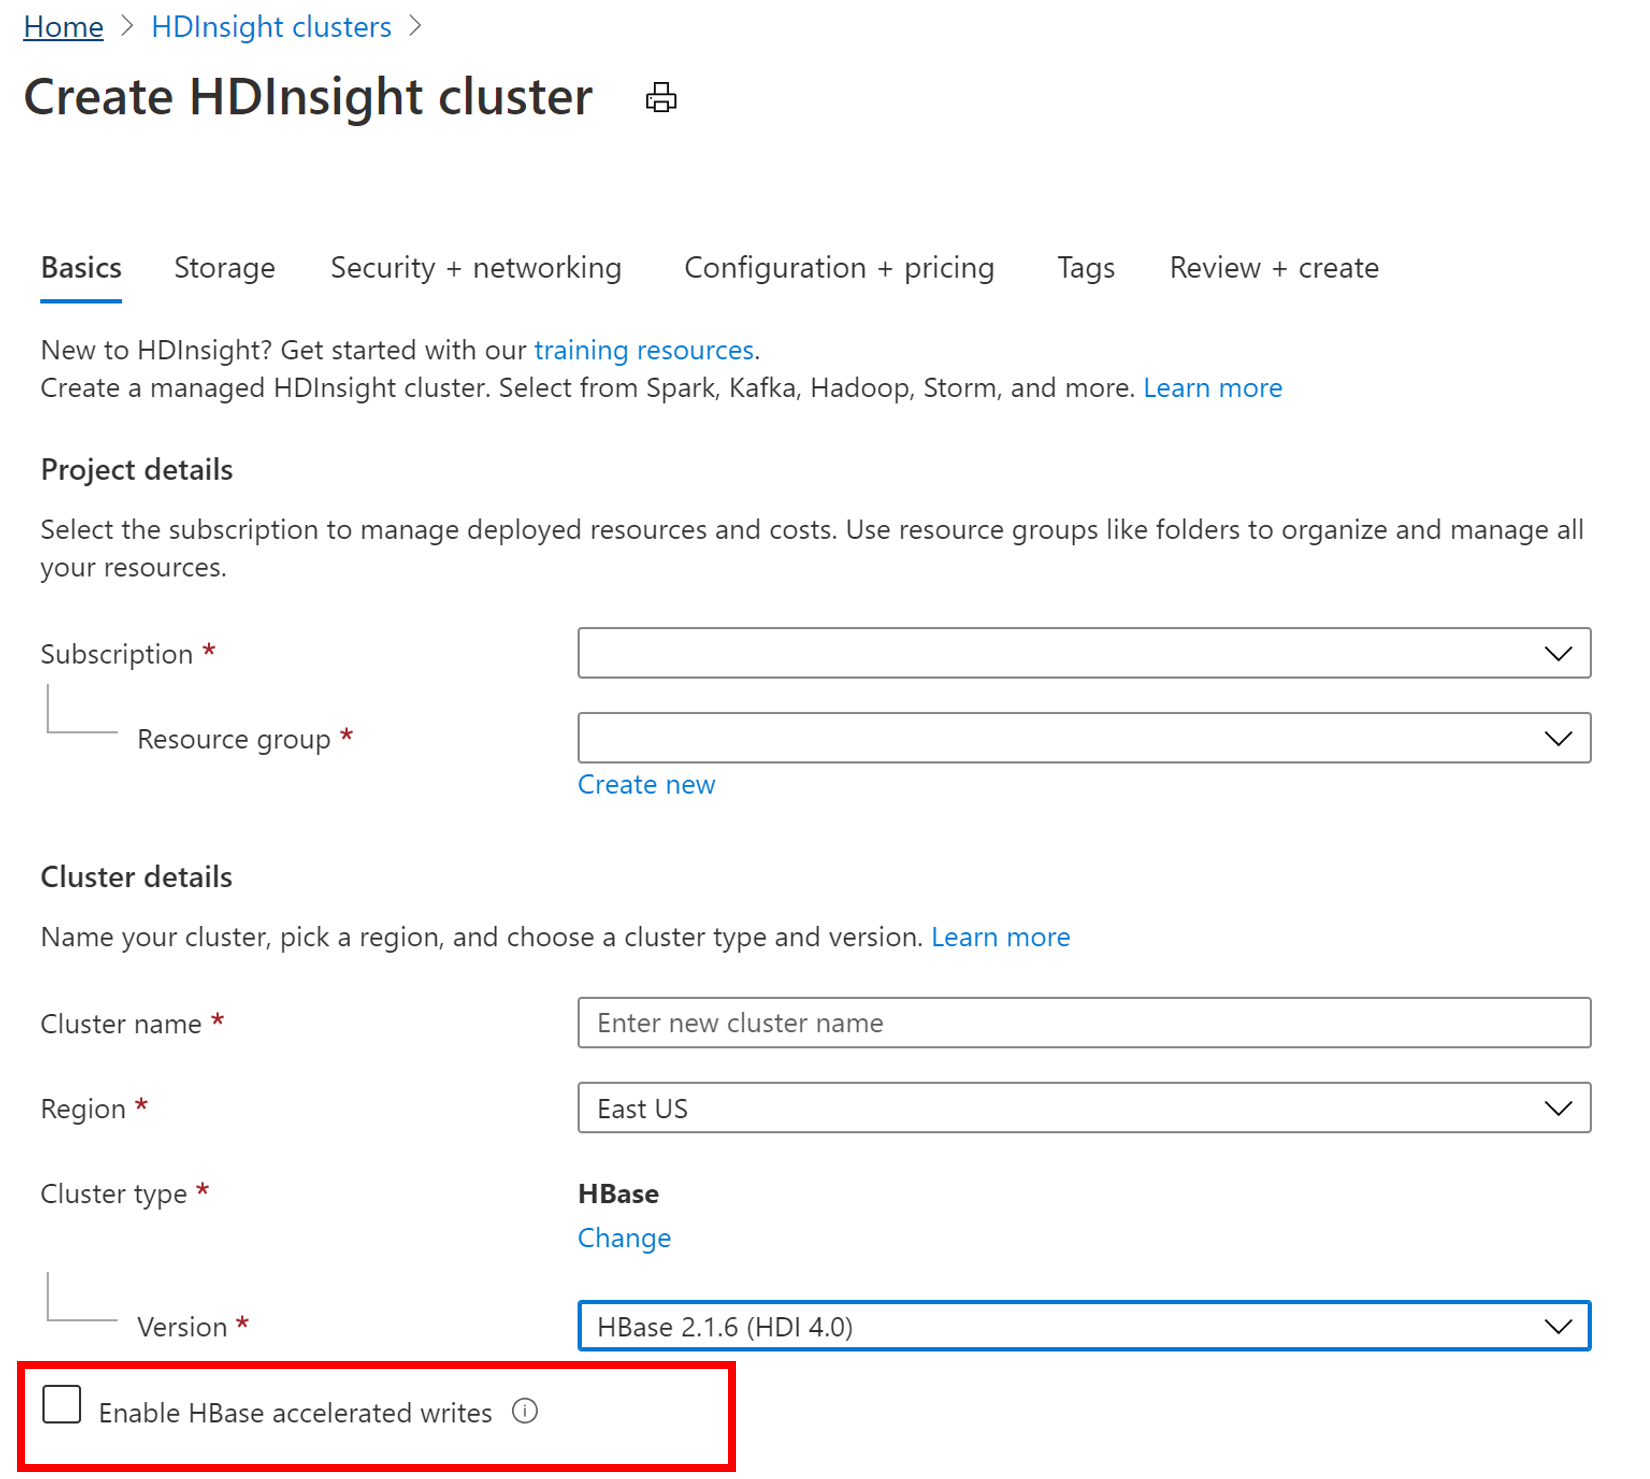 Enable accelerated writes option for HDInsight Apache HBase.